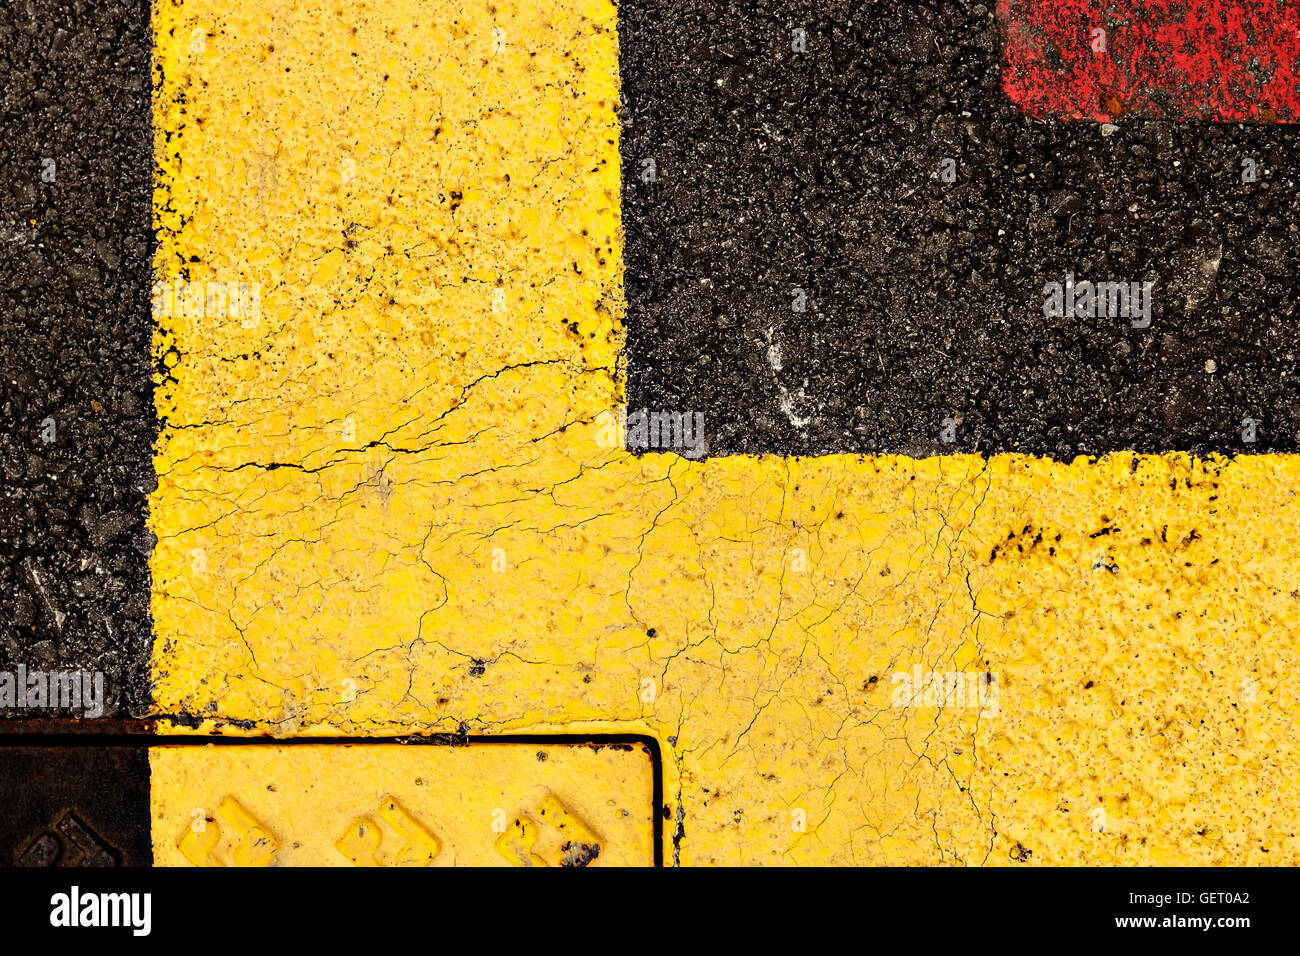 Asphalt painted yellow and red, suitable for textured abstract background. Horizontal image. Stock Photo